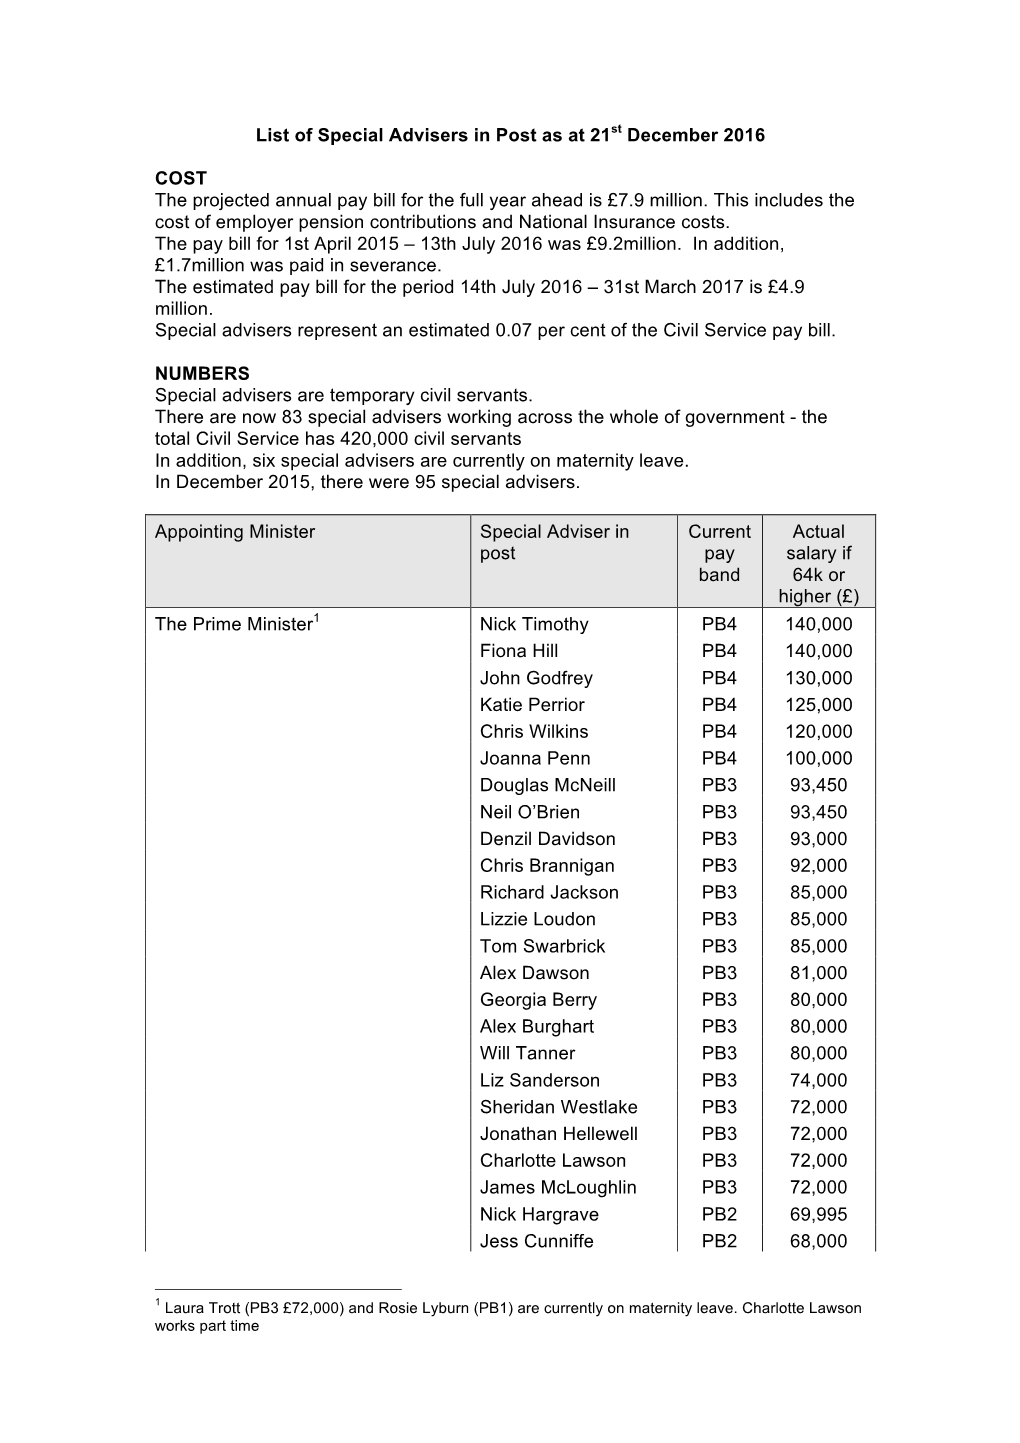 List of Special Advisers in Post As at 21St December 2016 COST the Projected Annual Pay Bill for the Full Year Ahead Is £7.9 Mi